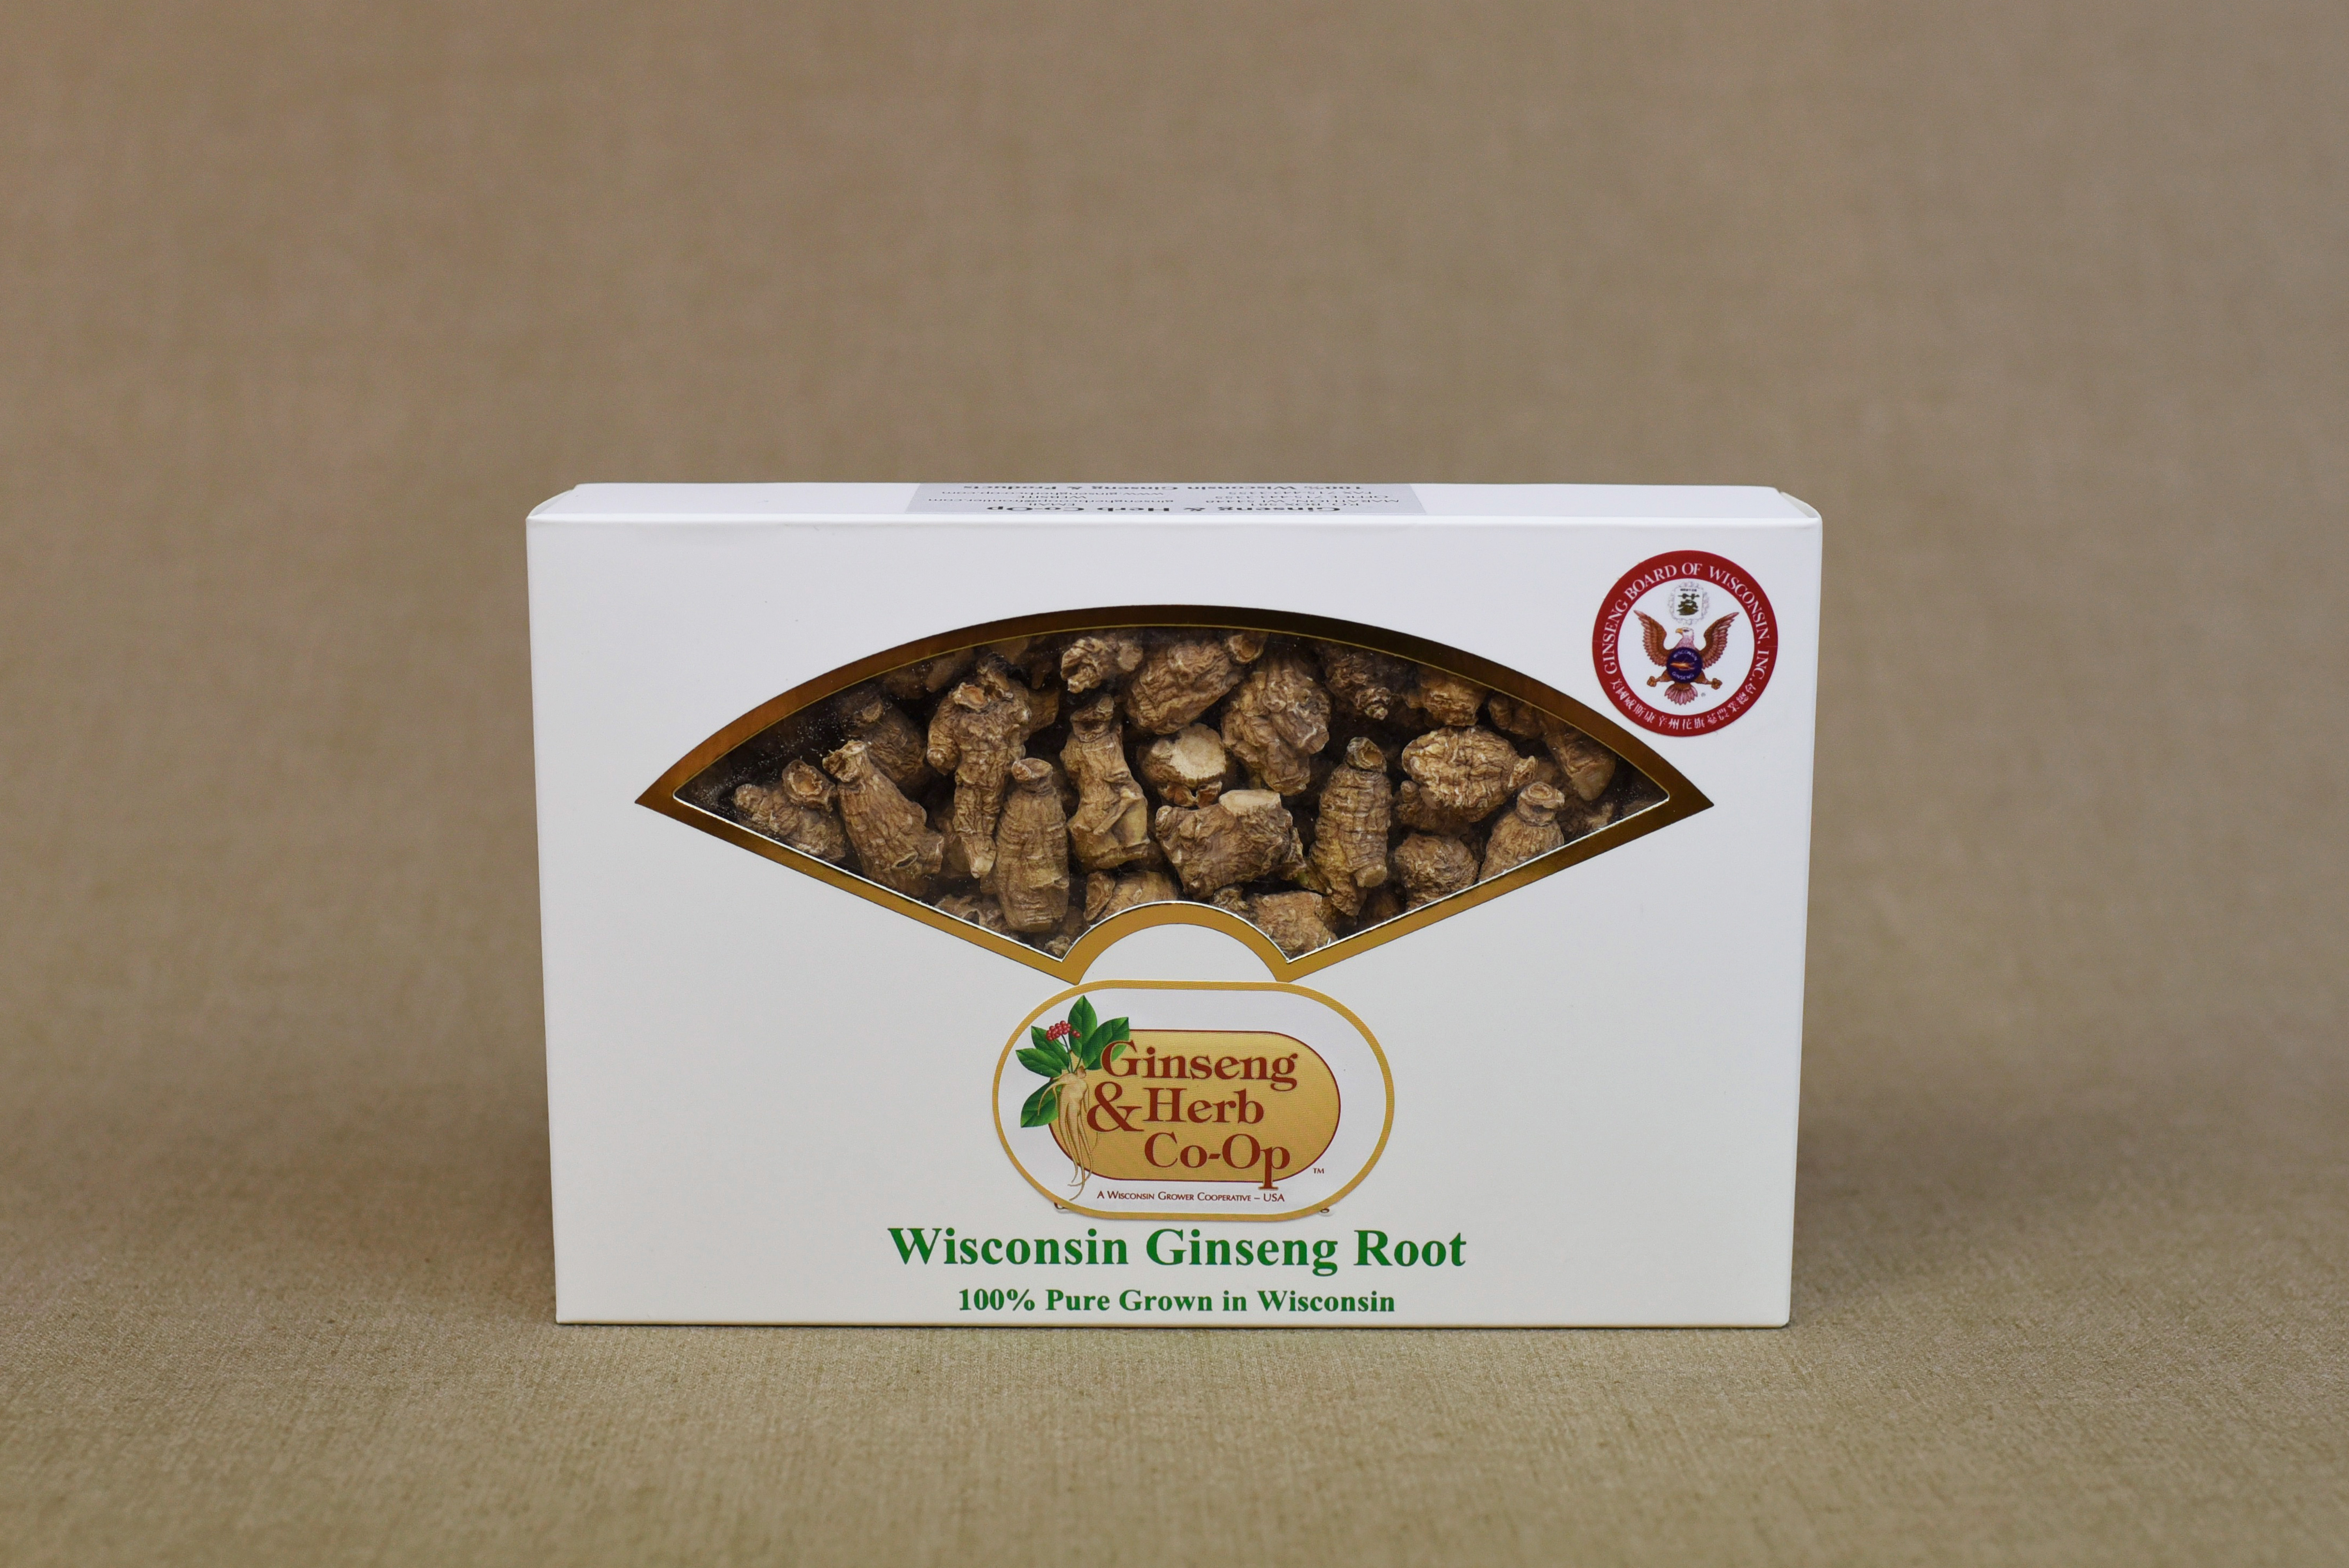 Buy Now! high quality Wisconsin Ginseng roots in Appleton, WI